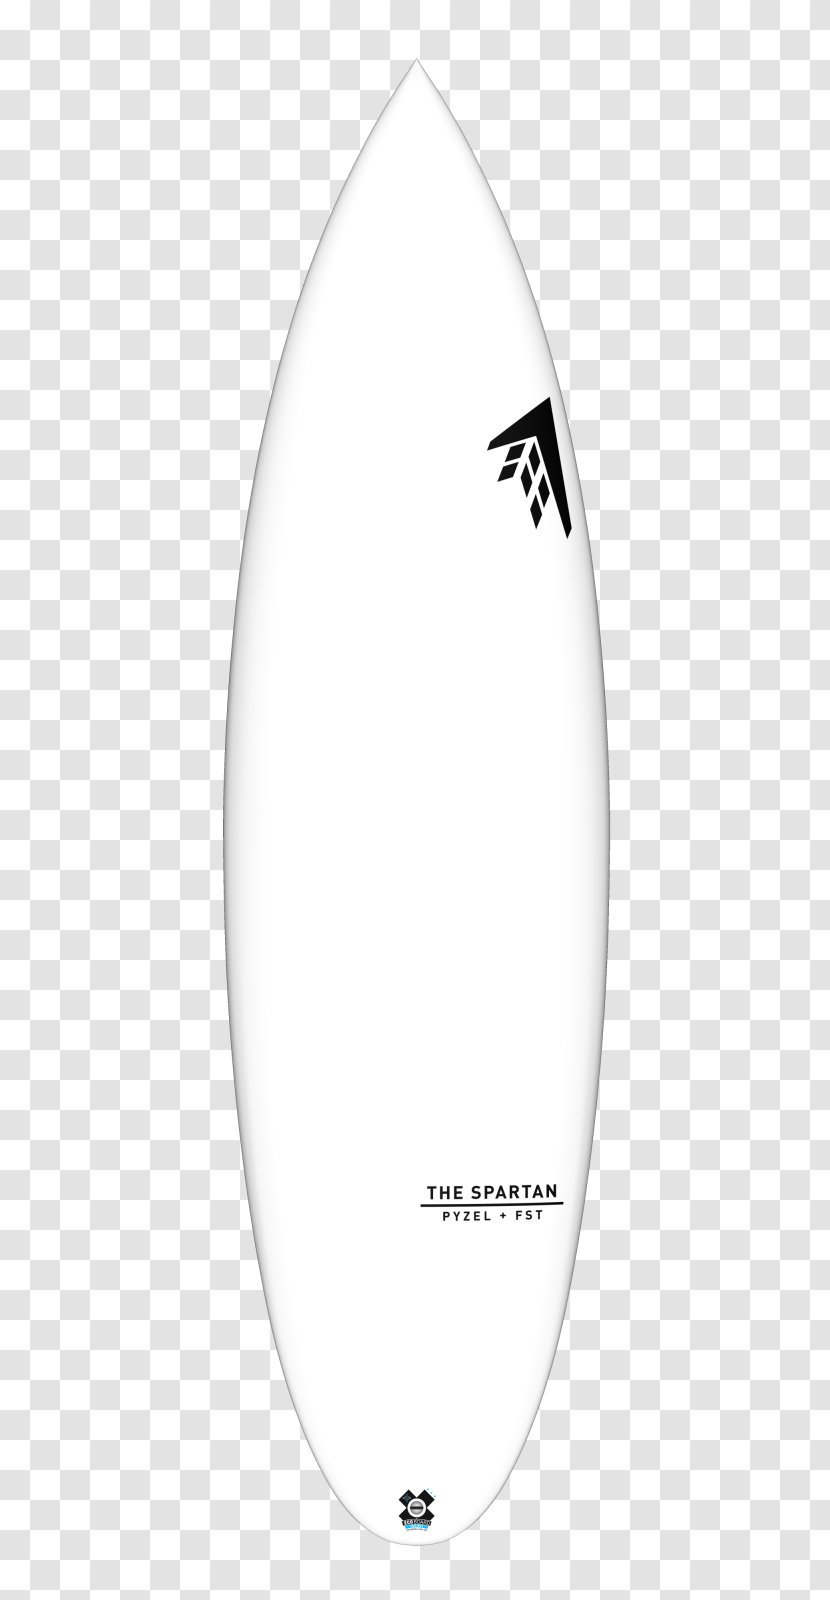 Surfboard Font - Surfing Equipment And Supplies - Surf Board Transparent PNG